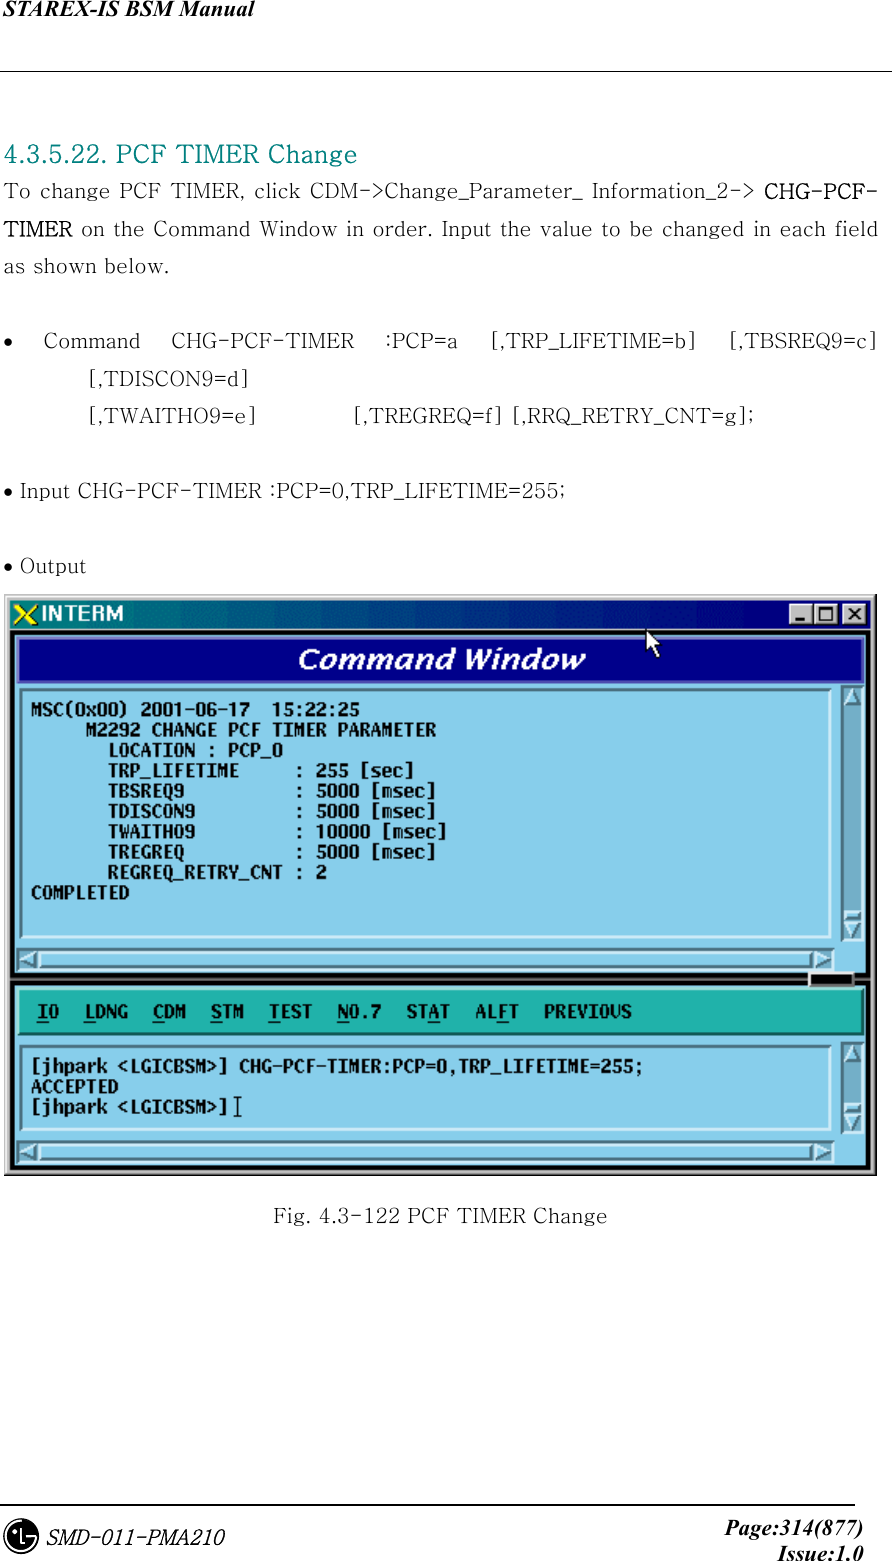 STAREX-IS BSM Manual     Page:314(877)Issue:1.0SMD-011-PMA210  4.3.5.22. PCF TIMER Change To change PCF TIMER, click CDM-&gt;Change_Parameter_ Information_2-&gt; CHG-PCF-TIMER on the Command Window in order. Input the value to be changed in each field as shown below.  •  Command  CHG-PCF-TIMER  :PCP=a  [,TRP_LIFETIME=b]  [,TBSREQ9=c] [,TDISCON9=d]   [,TWAITHO9=e]         [,TREGREQ=f] [,RRQ_RETRY_CNT=g];  • Input CHG-PCF-TIMER :PCP=0,TRP_LIFETIME=255;  • Output  Fig. 4.3-122 PCF TIMER Change 